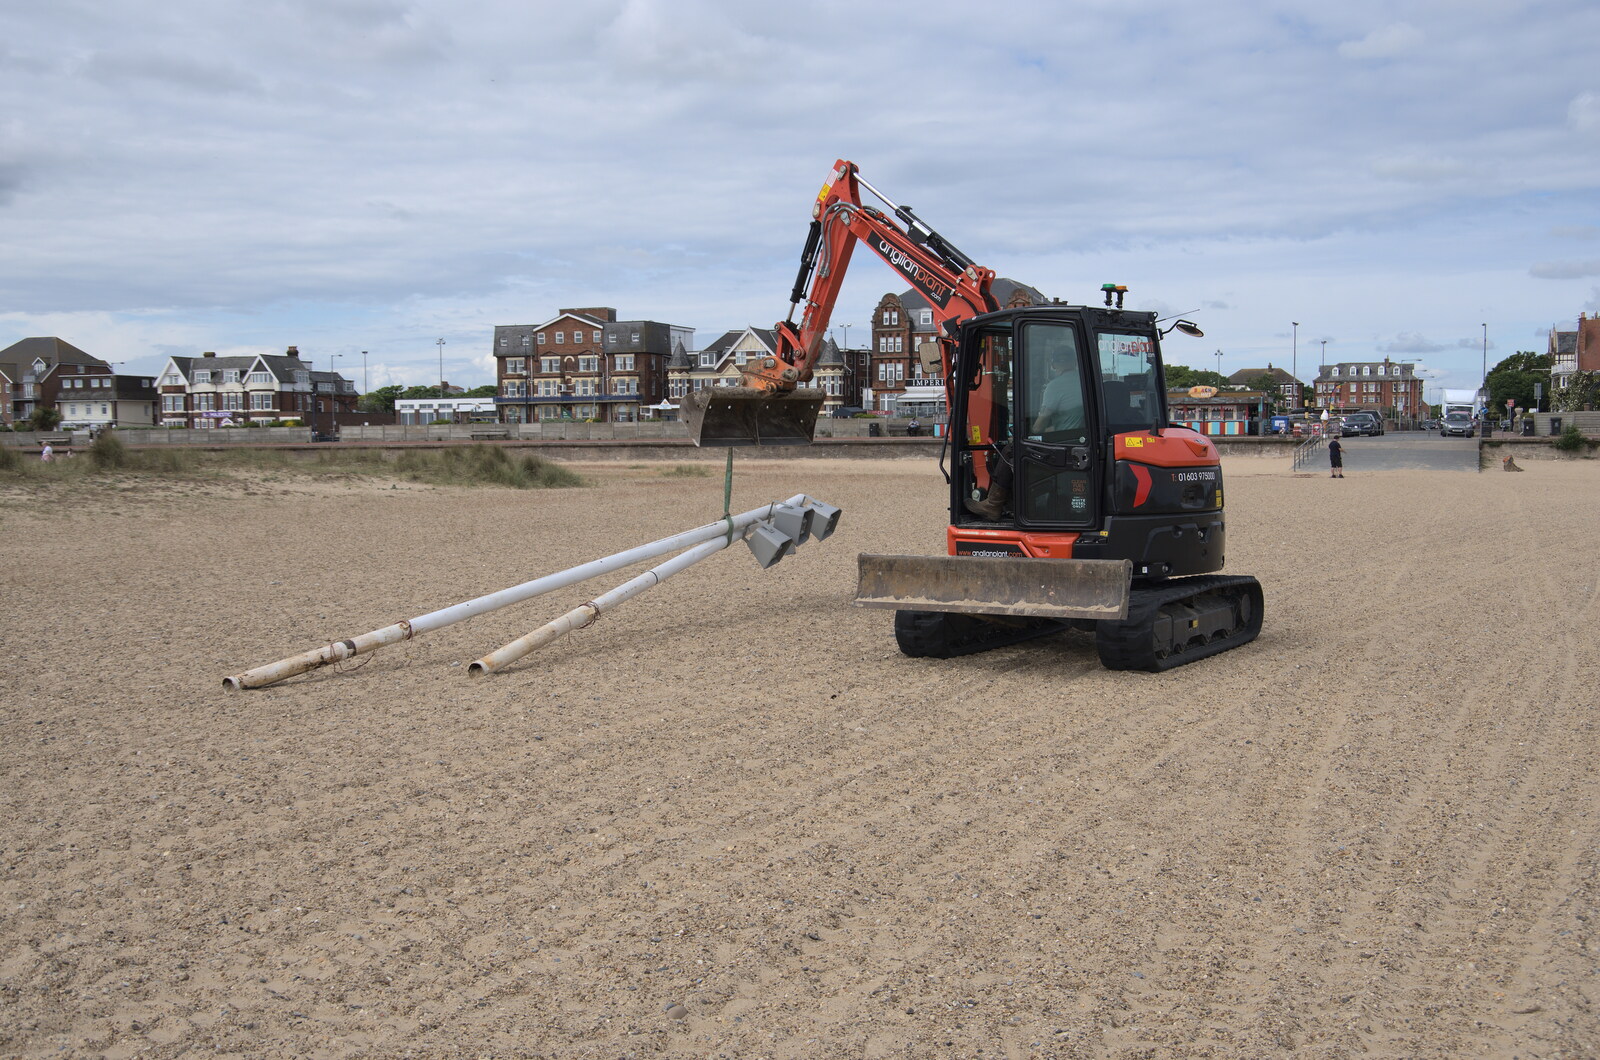 A digger hauls away some speakers from Faded Seaside Glamour: A Weekend in Great Yarmouth, Norfolk - 29th May 2022